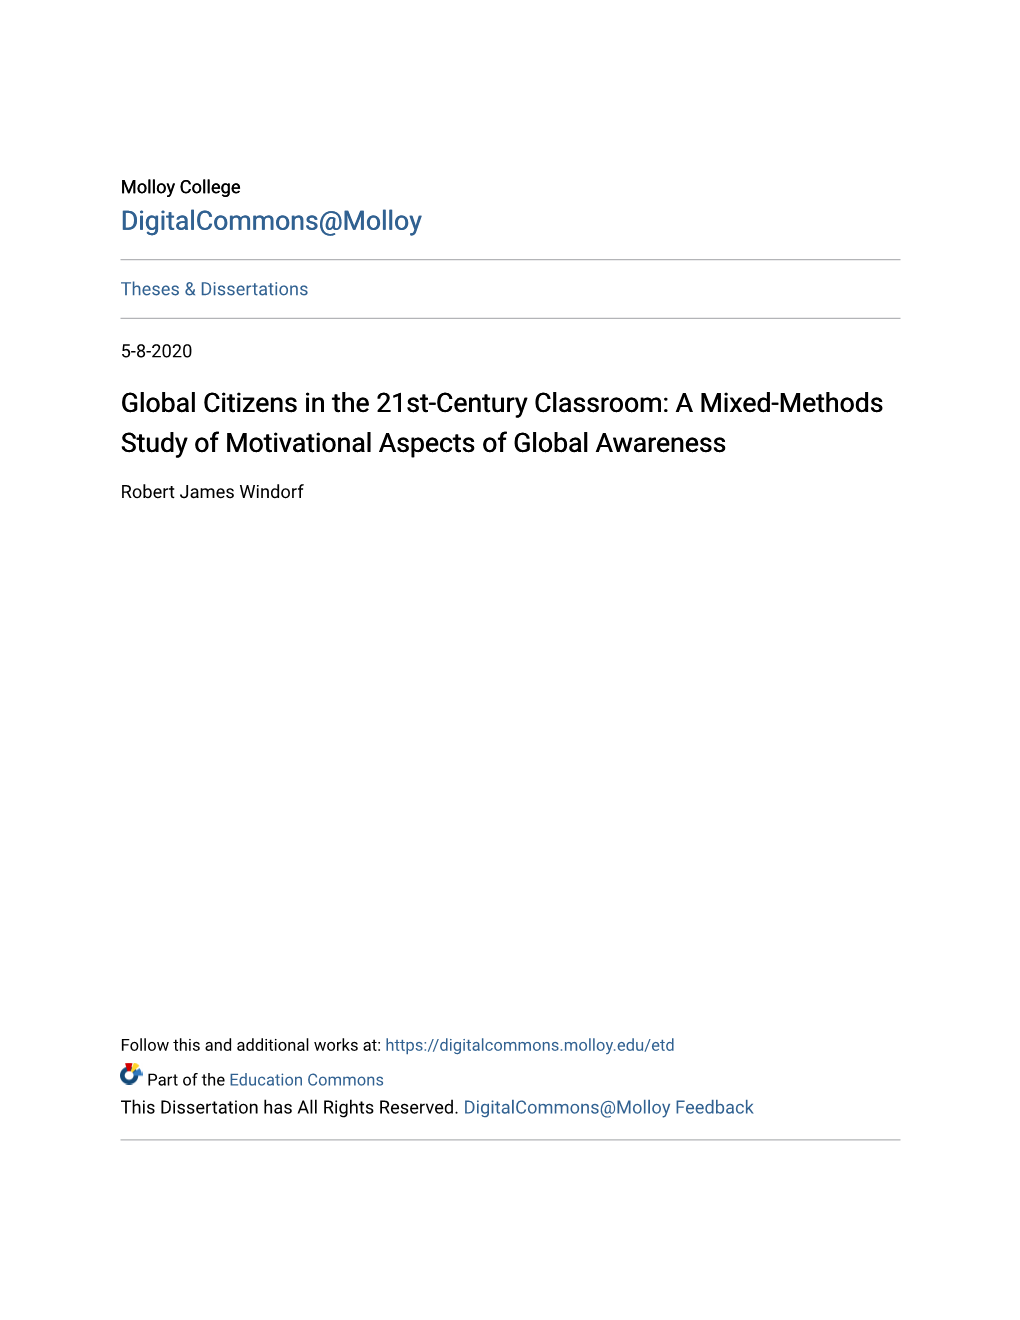 Global Citizens in the 21St-Century Classroom: a Mixed-Methods Study of Motivational Aspects of Global Awareness